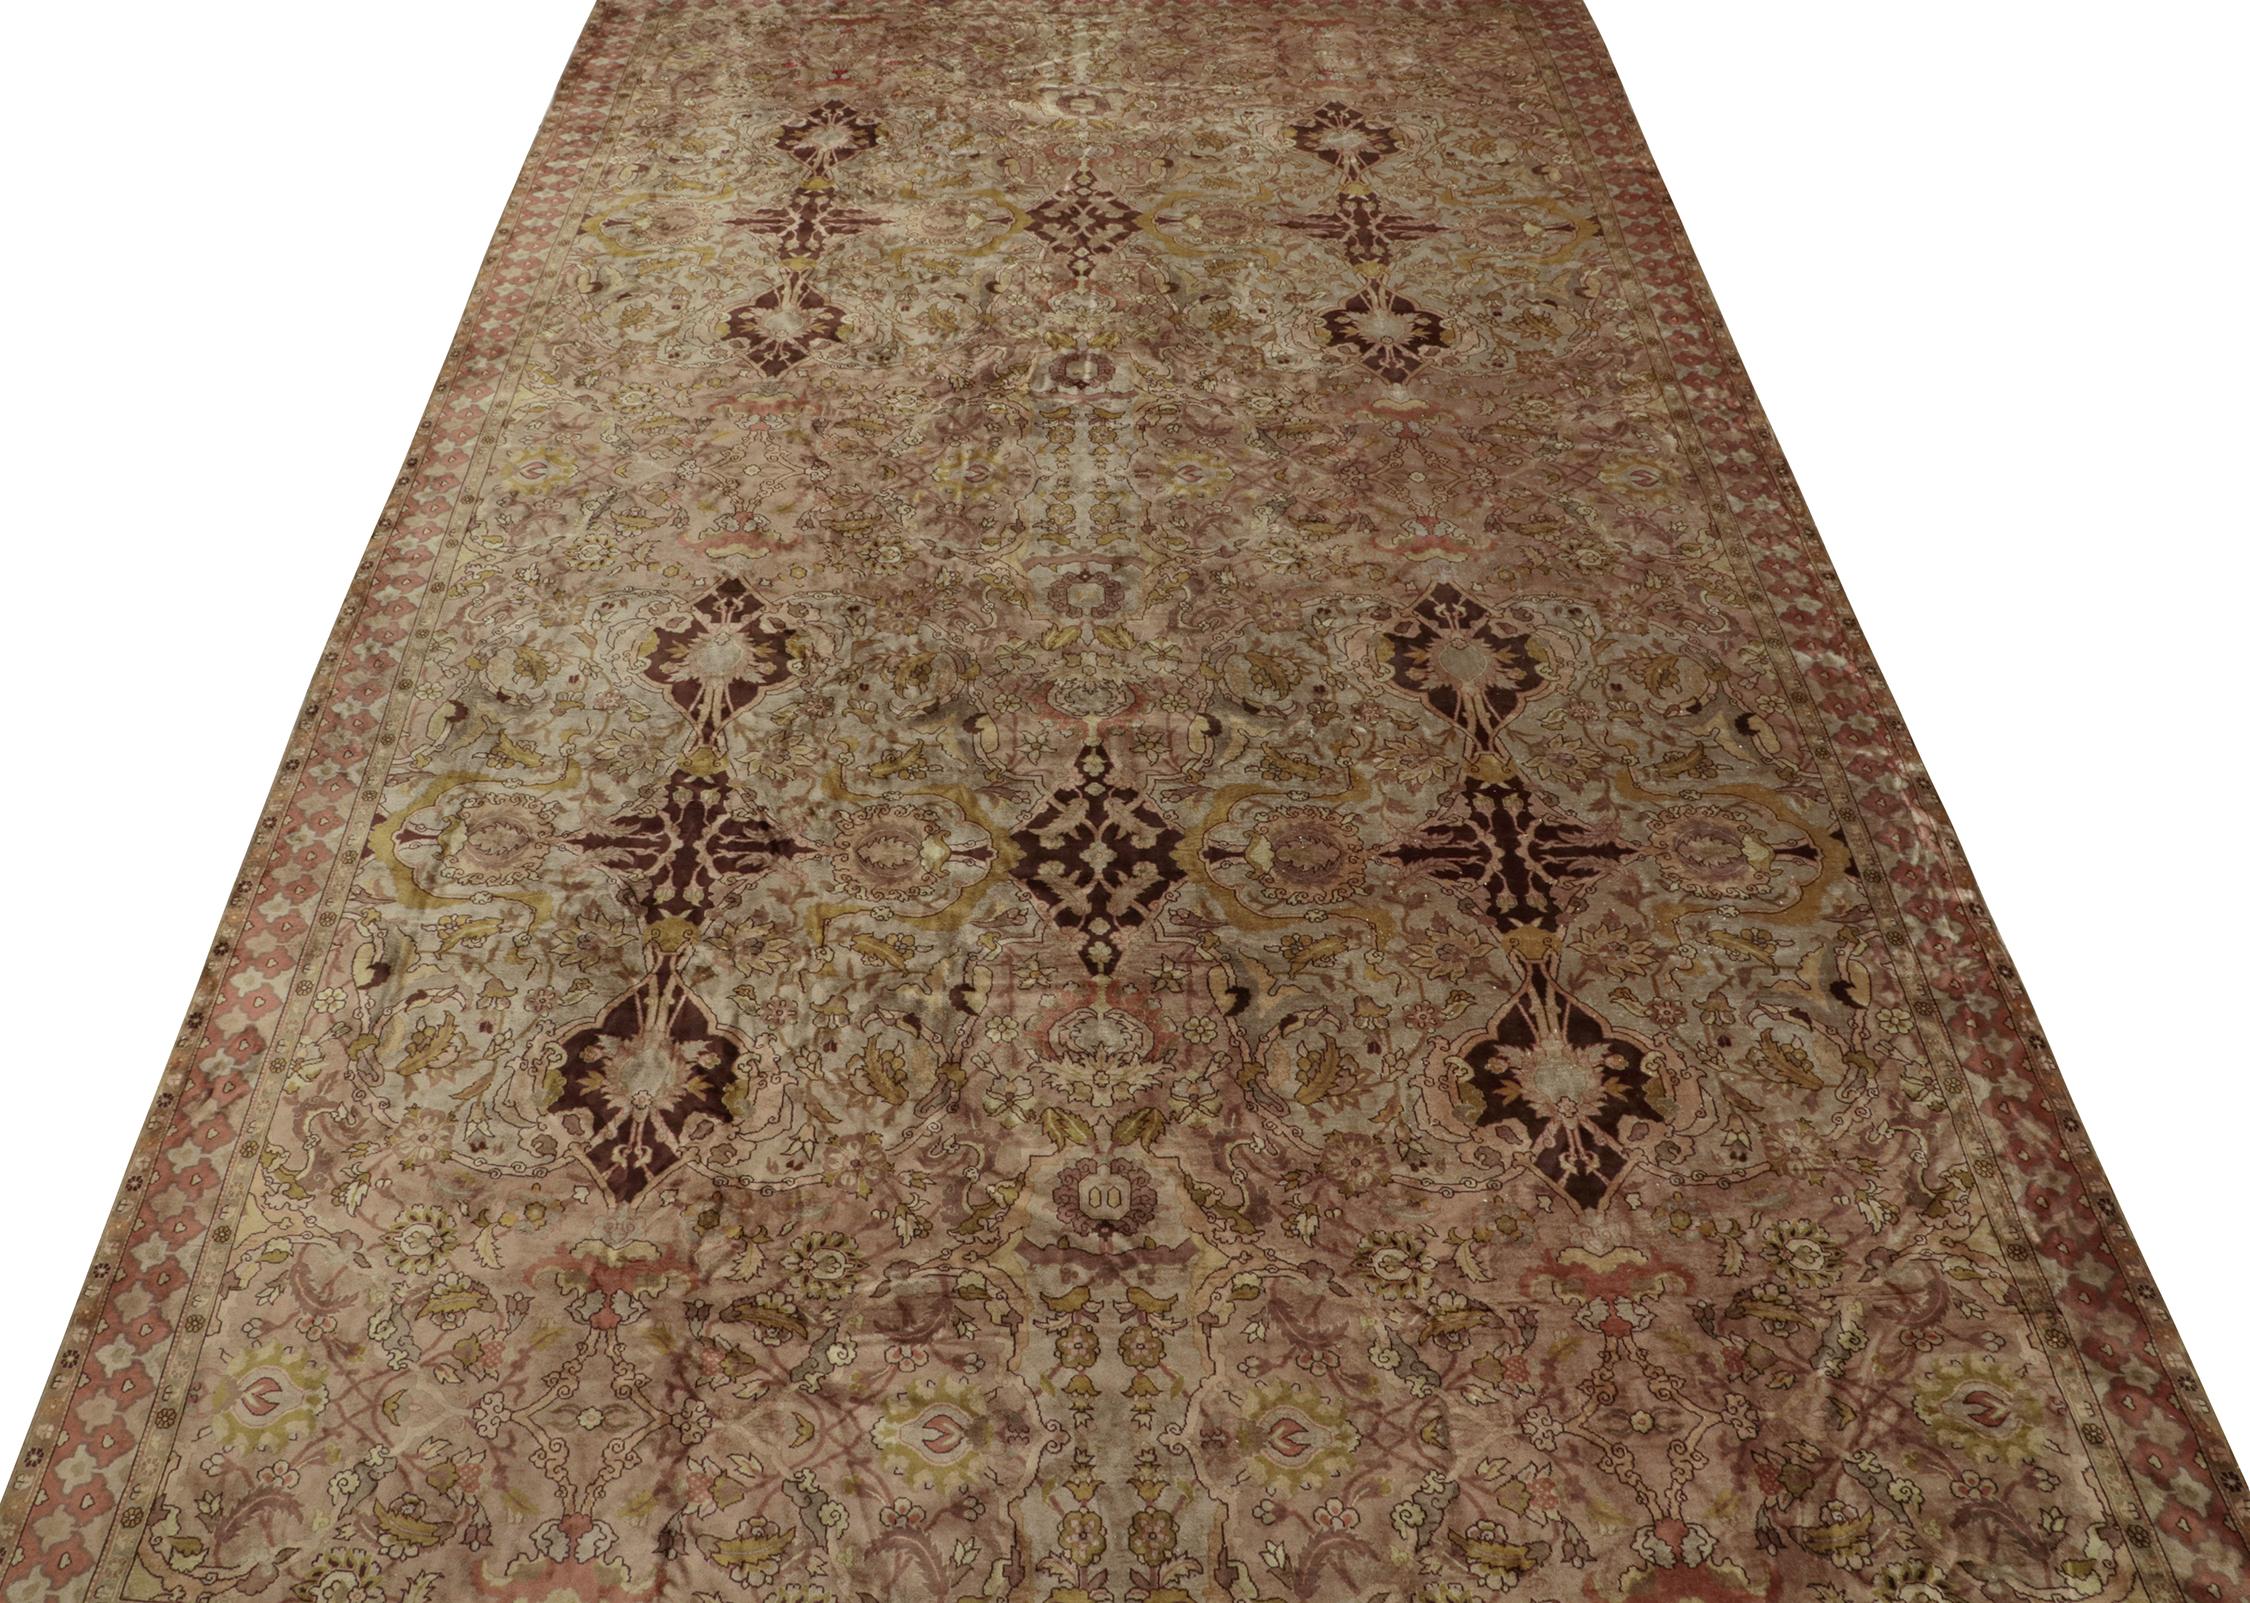 Rug & Kilim presents an rare antique 12x21 polonaise rug from its latest curation of distinguished classics. Hand-knotted in wool circa 1910-1920.

On the Design:

This collectible enjoys several distinctions in color and pattern from mainstream